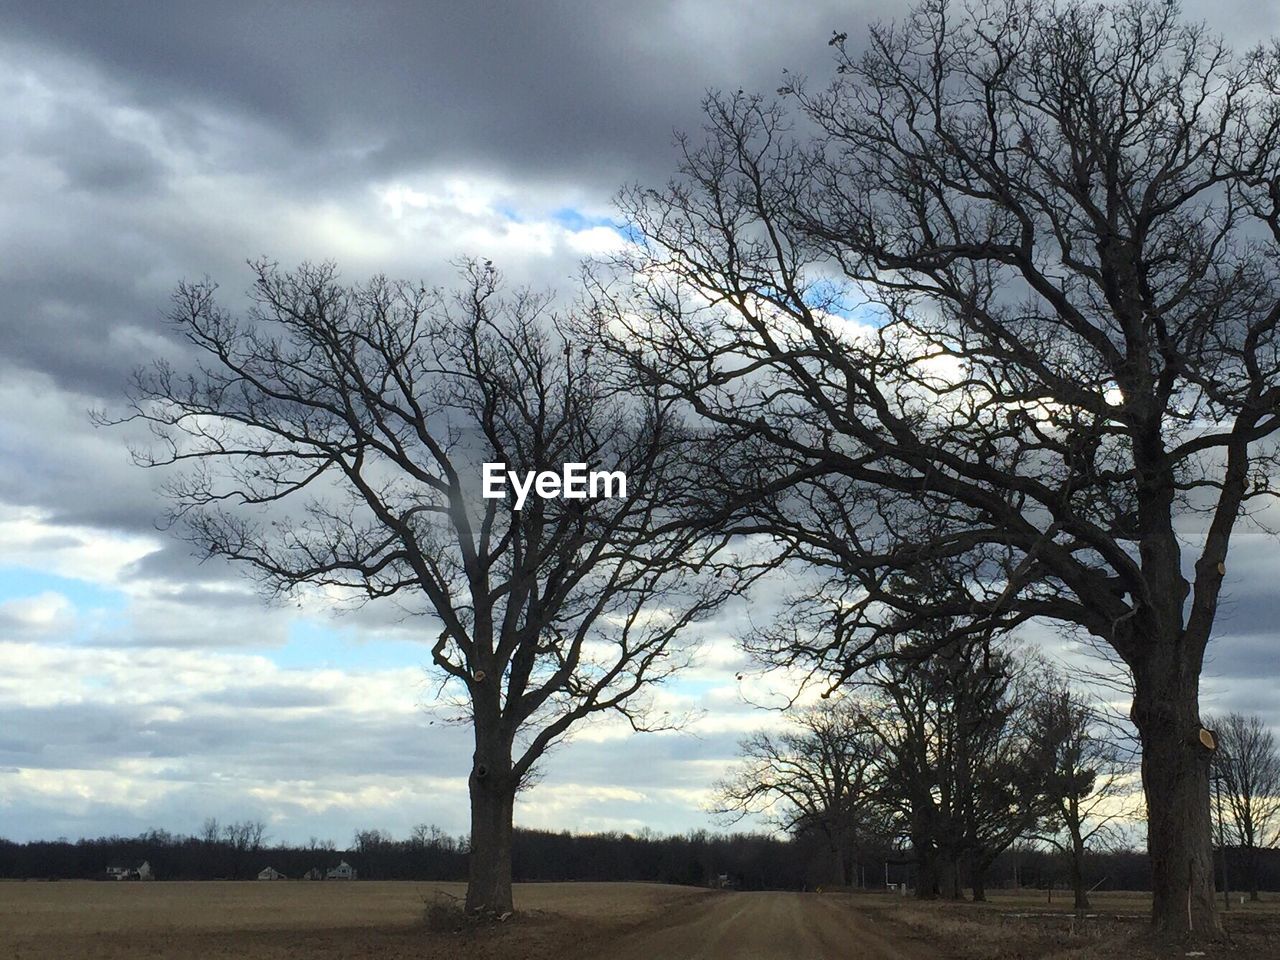 BARE TREES ON FIELD AGAINST CLOUDY SKY